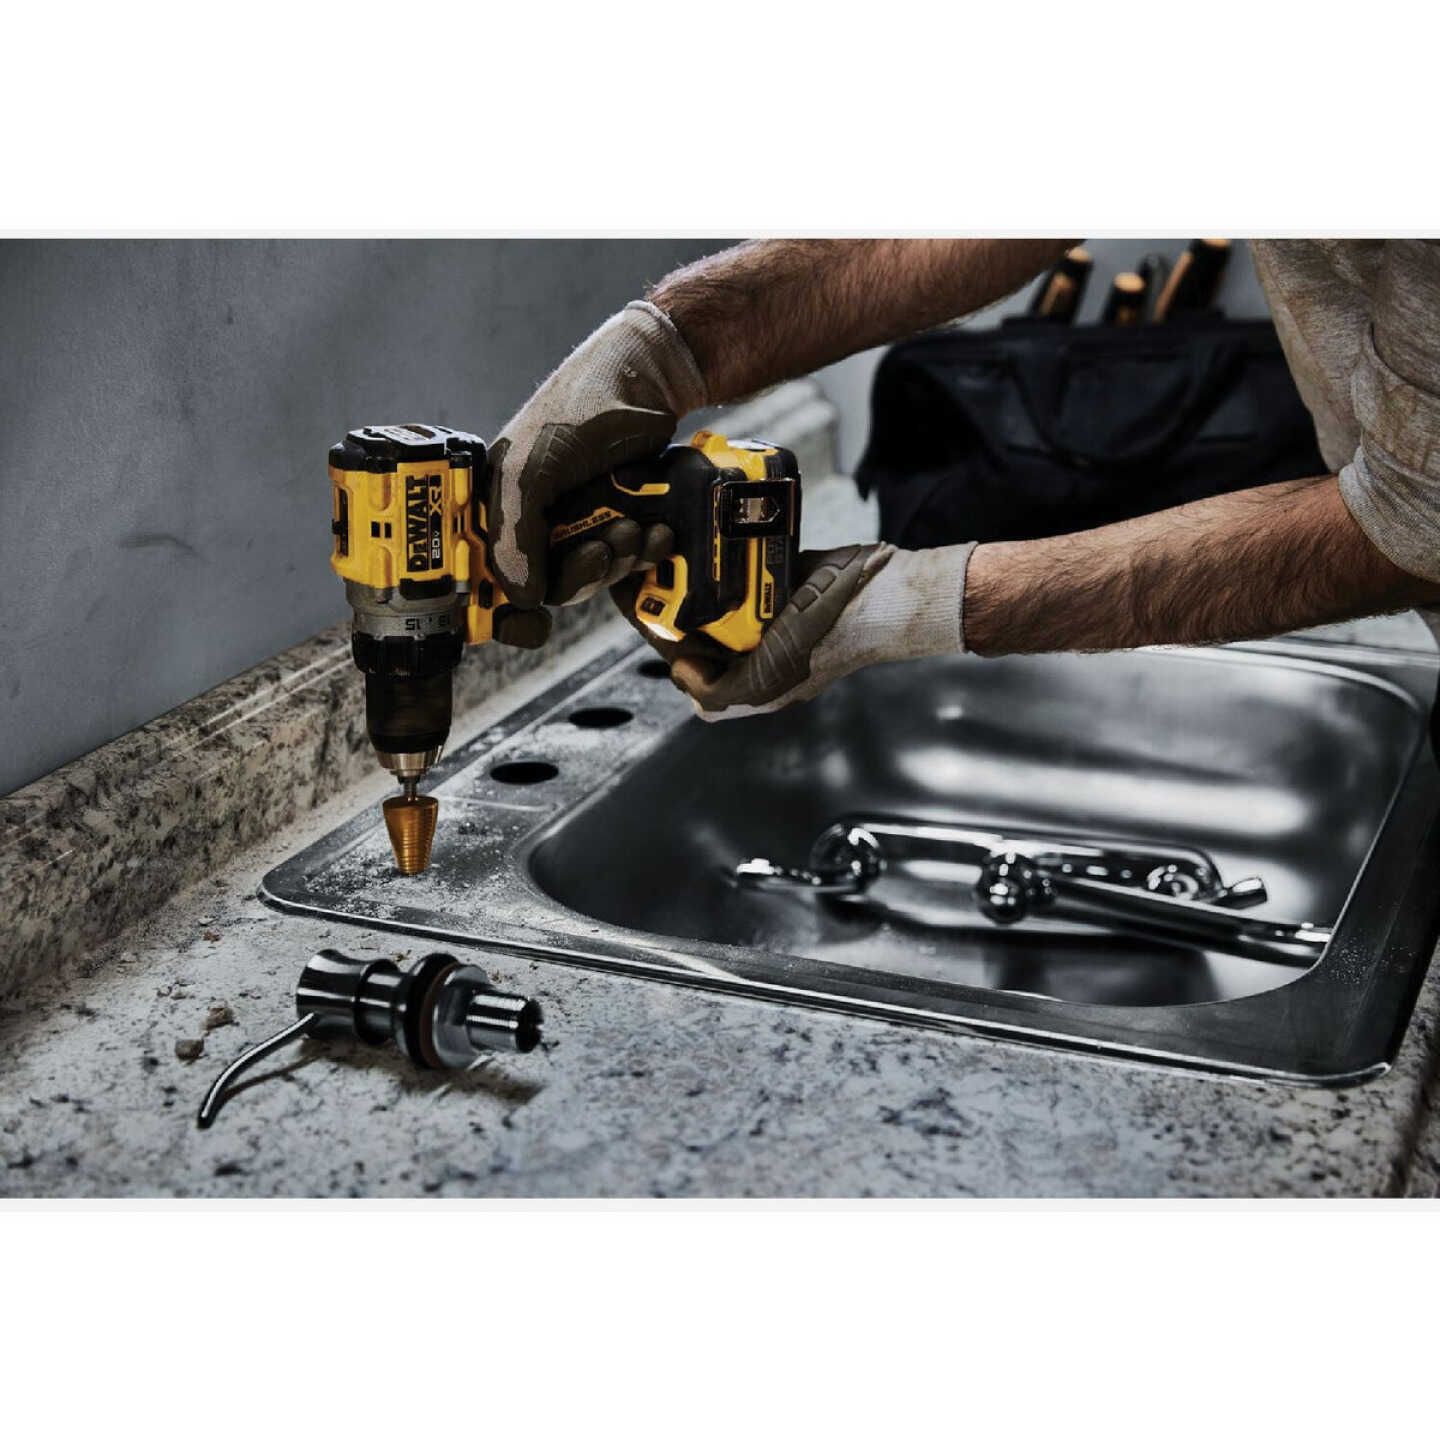 DEWALT 20V MAX XR Brushless 1/2 In. Compact Drill/Driver Kit with